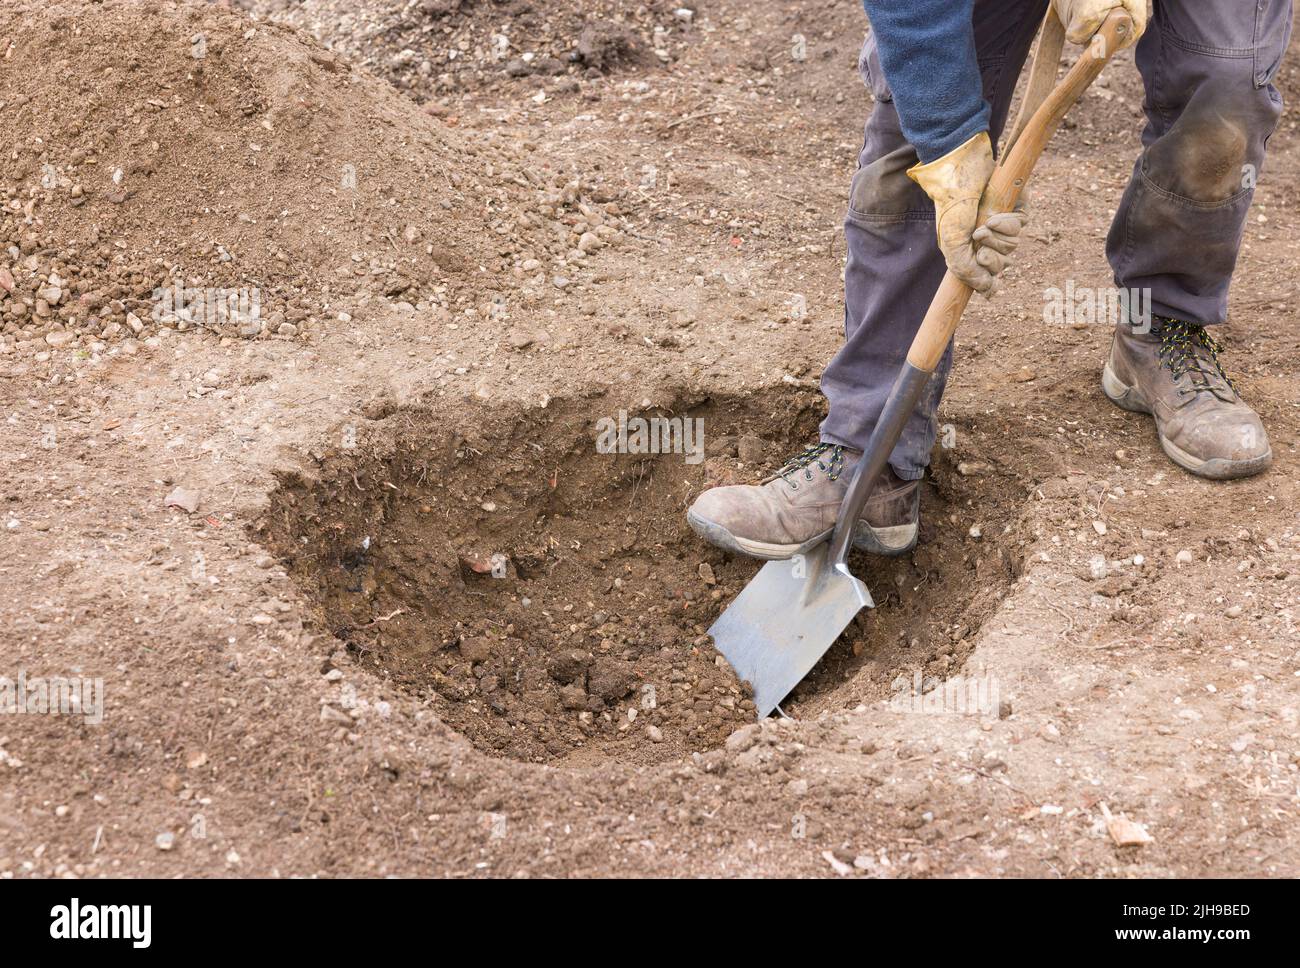 Gardener digging a hole in ground with a spade, preparing to plant a tree in a UK garden Stock Photo